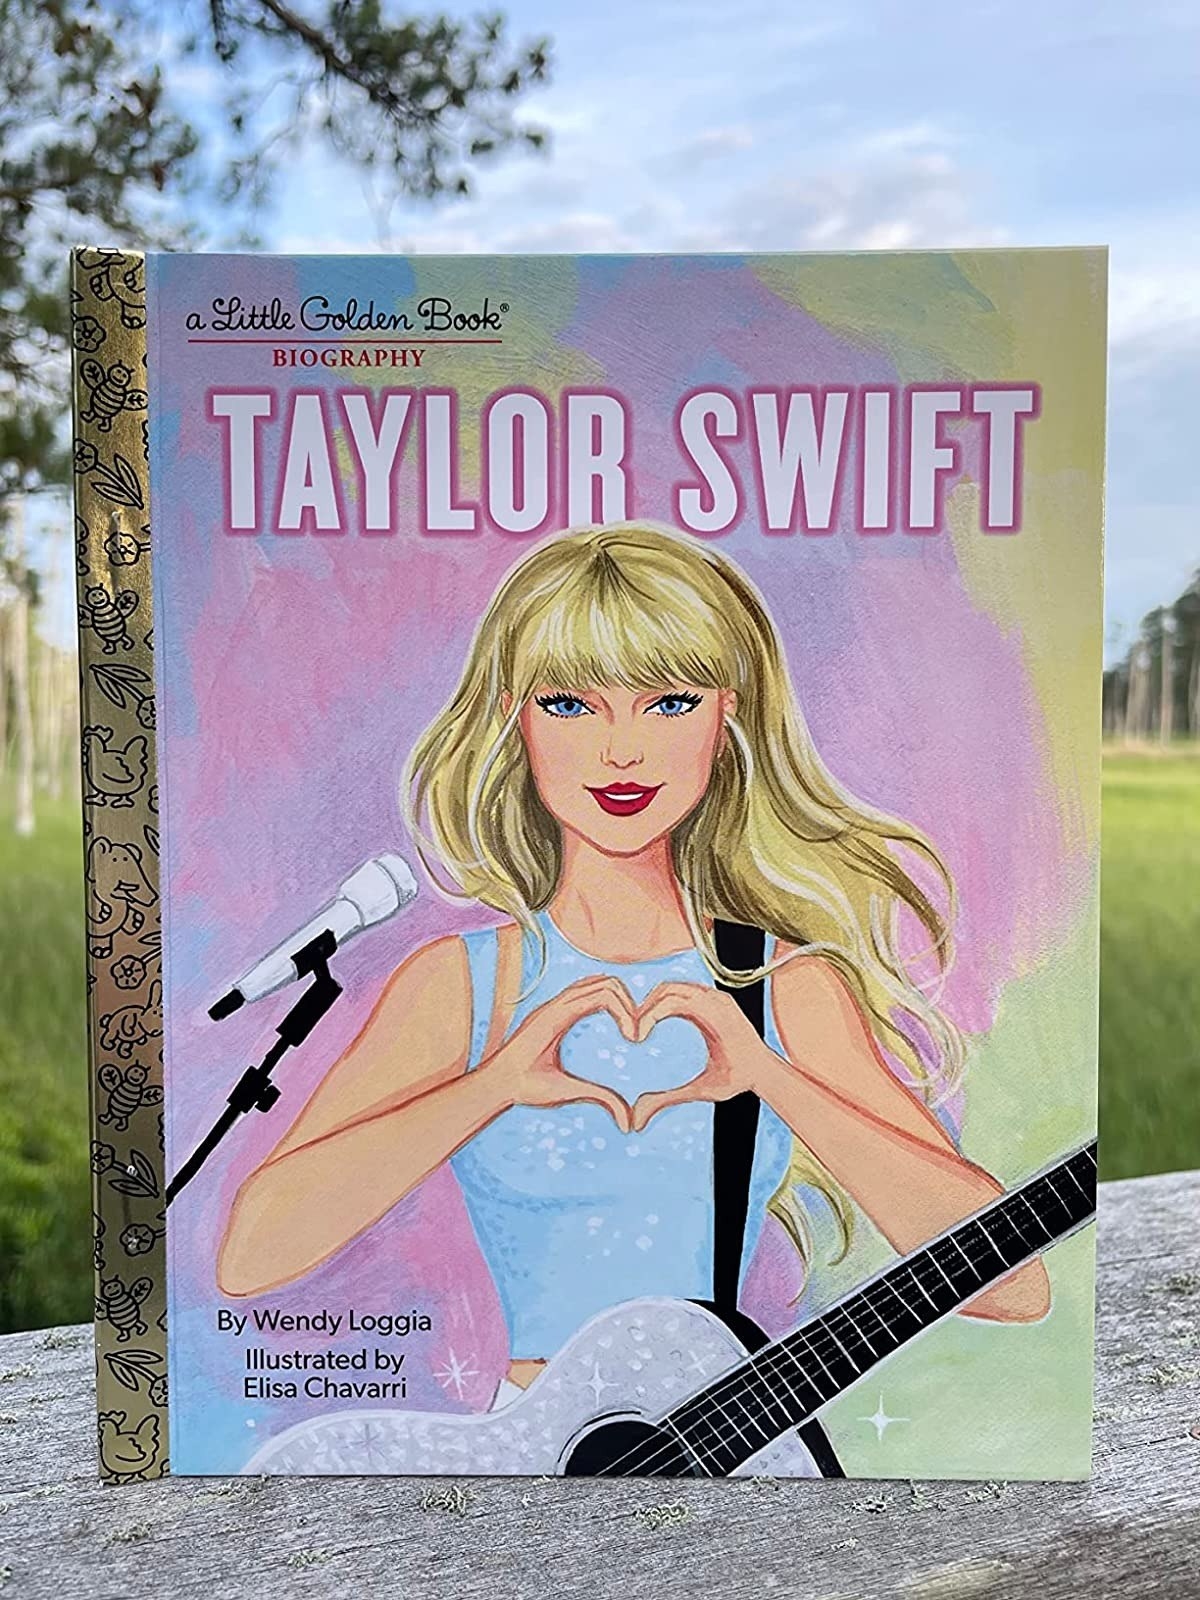 book cover with illustrated photo of Taylor Swift holding a guitar